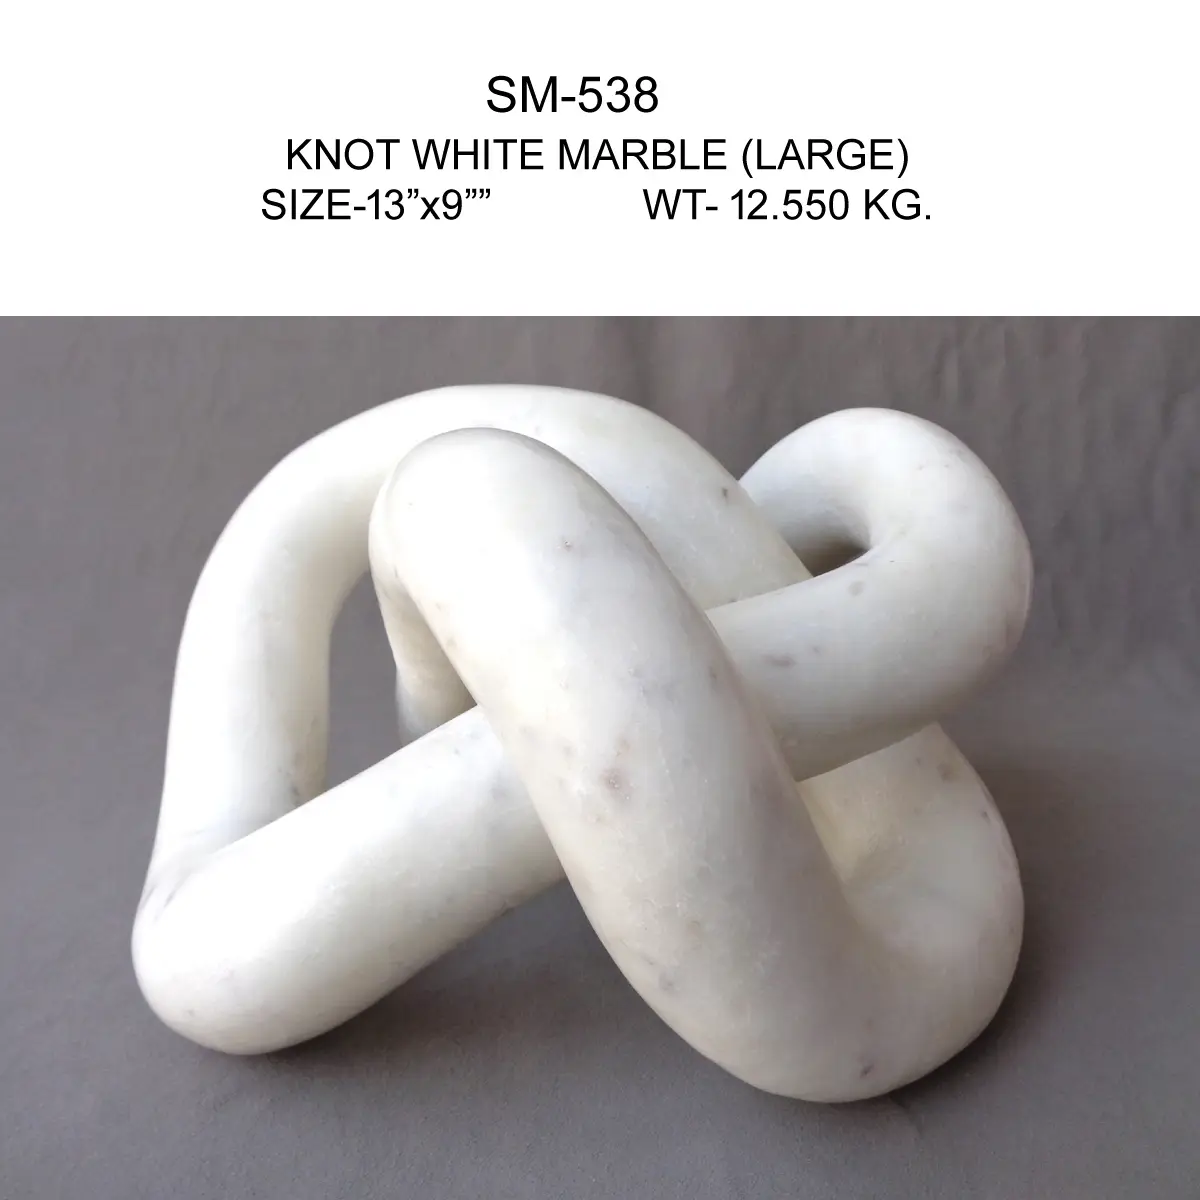 WHITE MARBLE KNOT SAMPLE LARGE